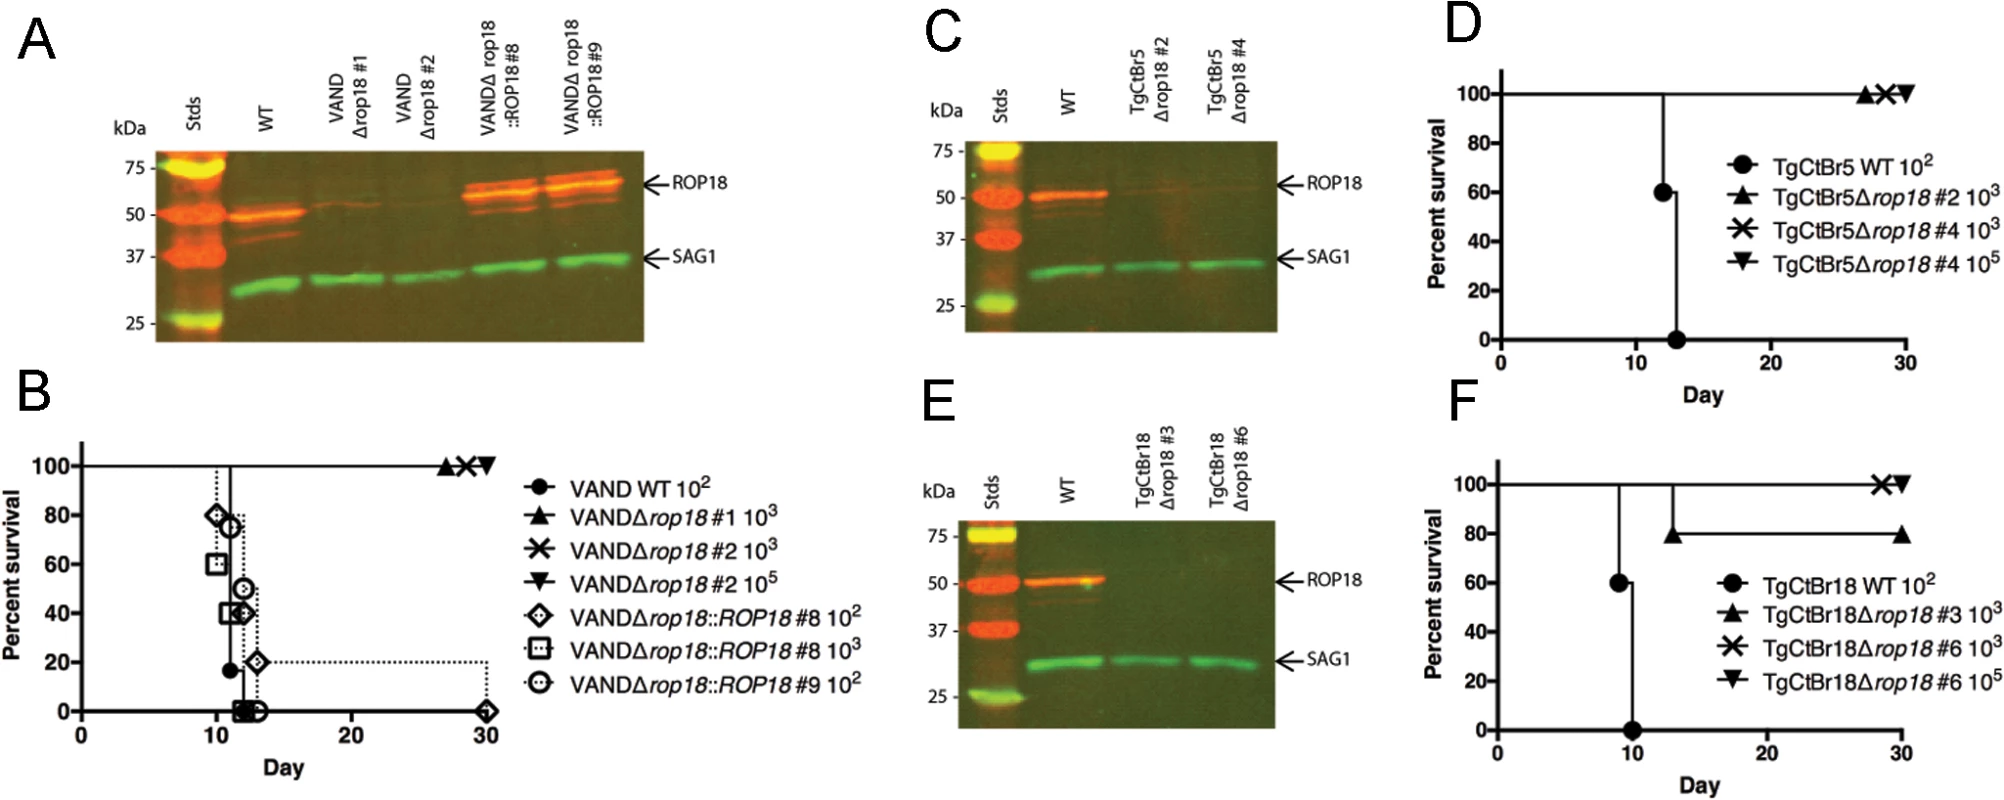 ROP18 is essential for virulence in South American strains VAND, TgCtBr5, and TgCtBr18.